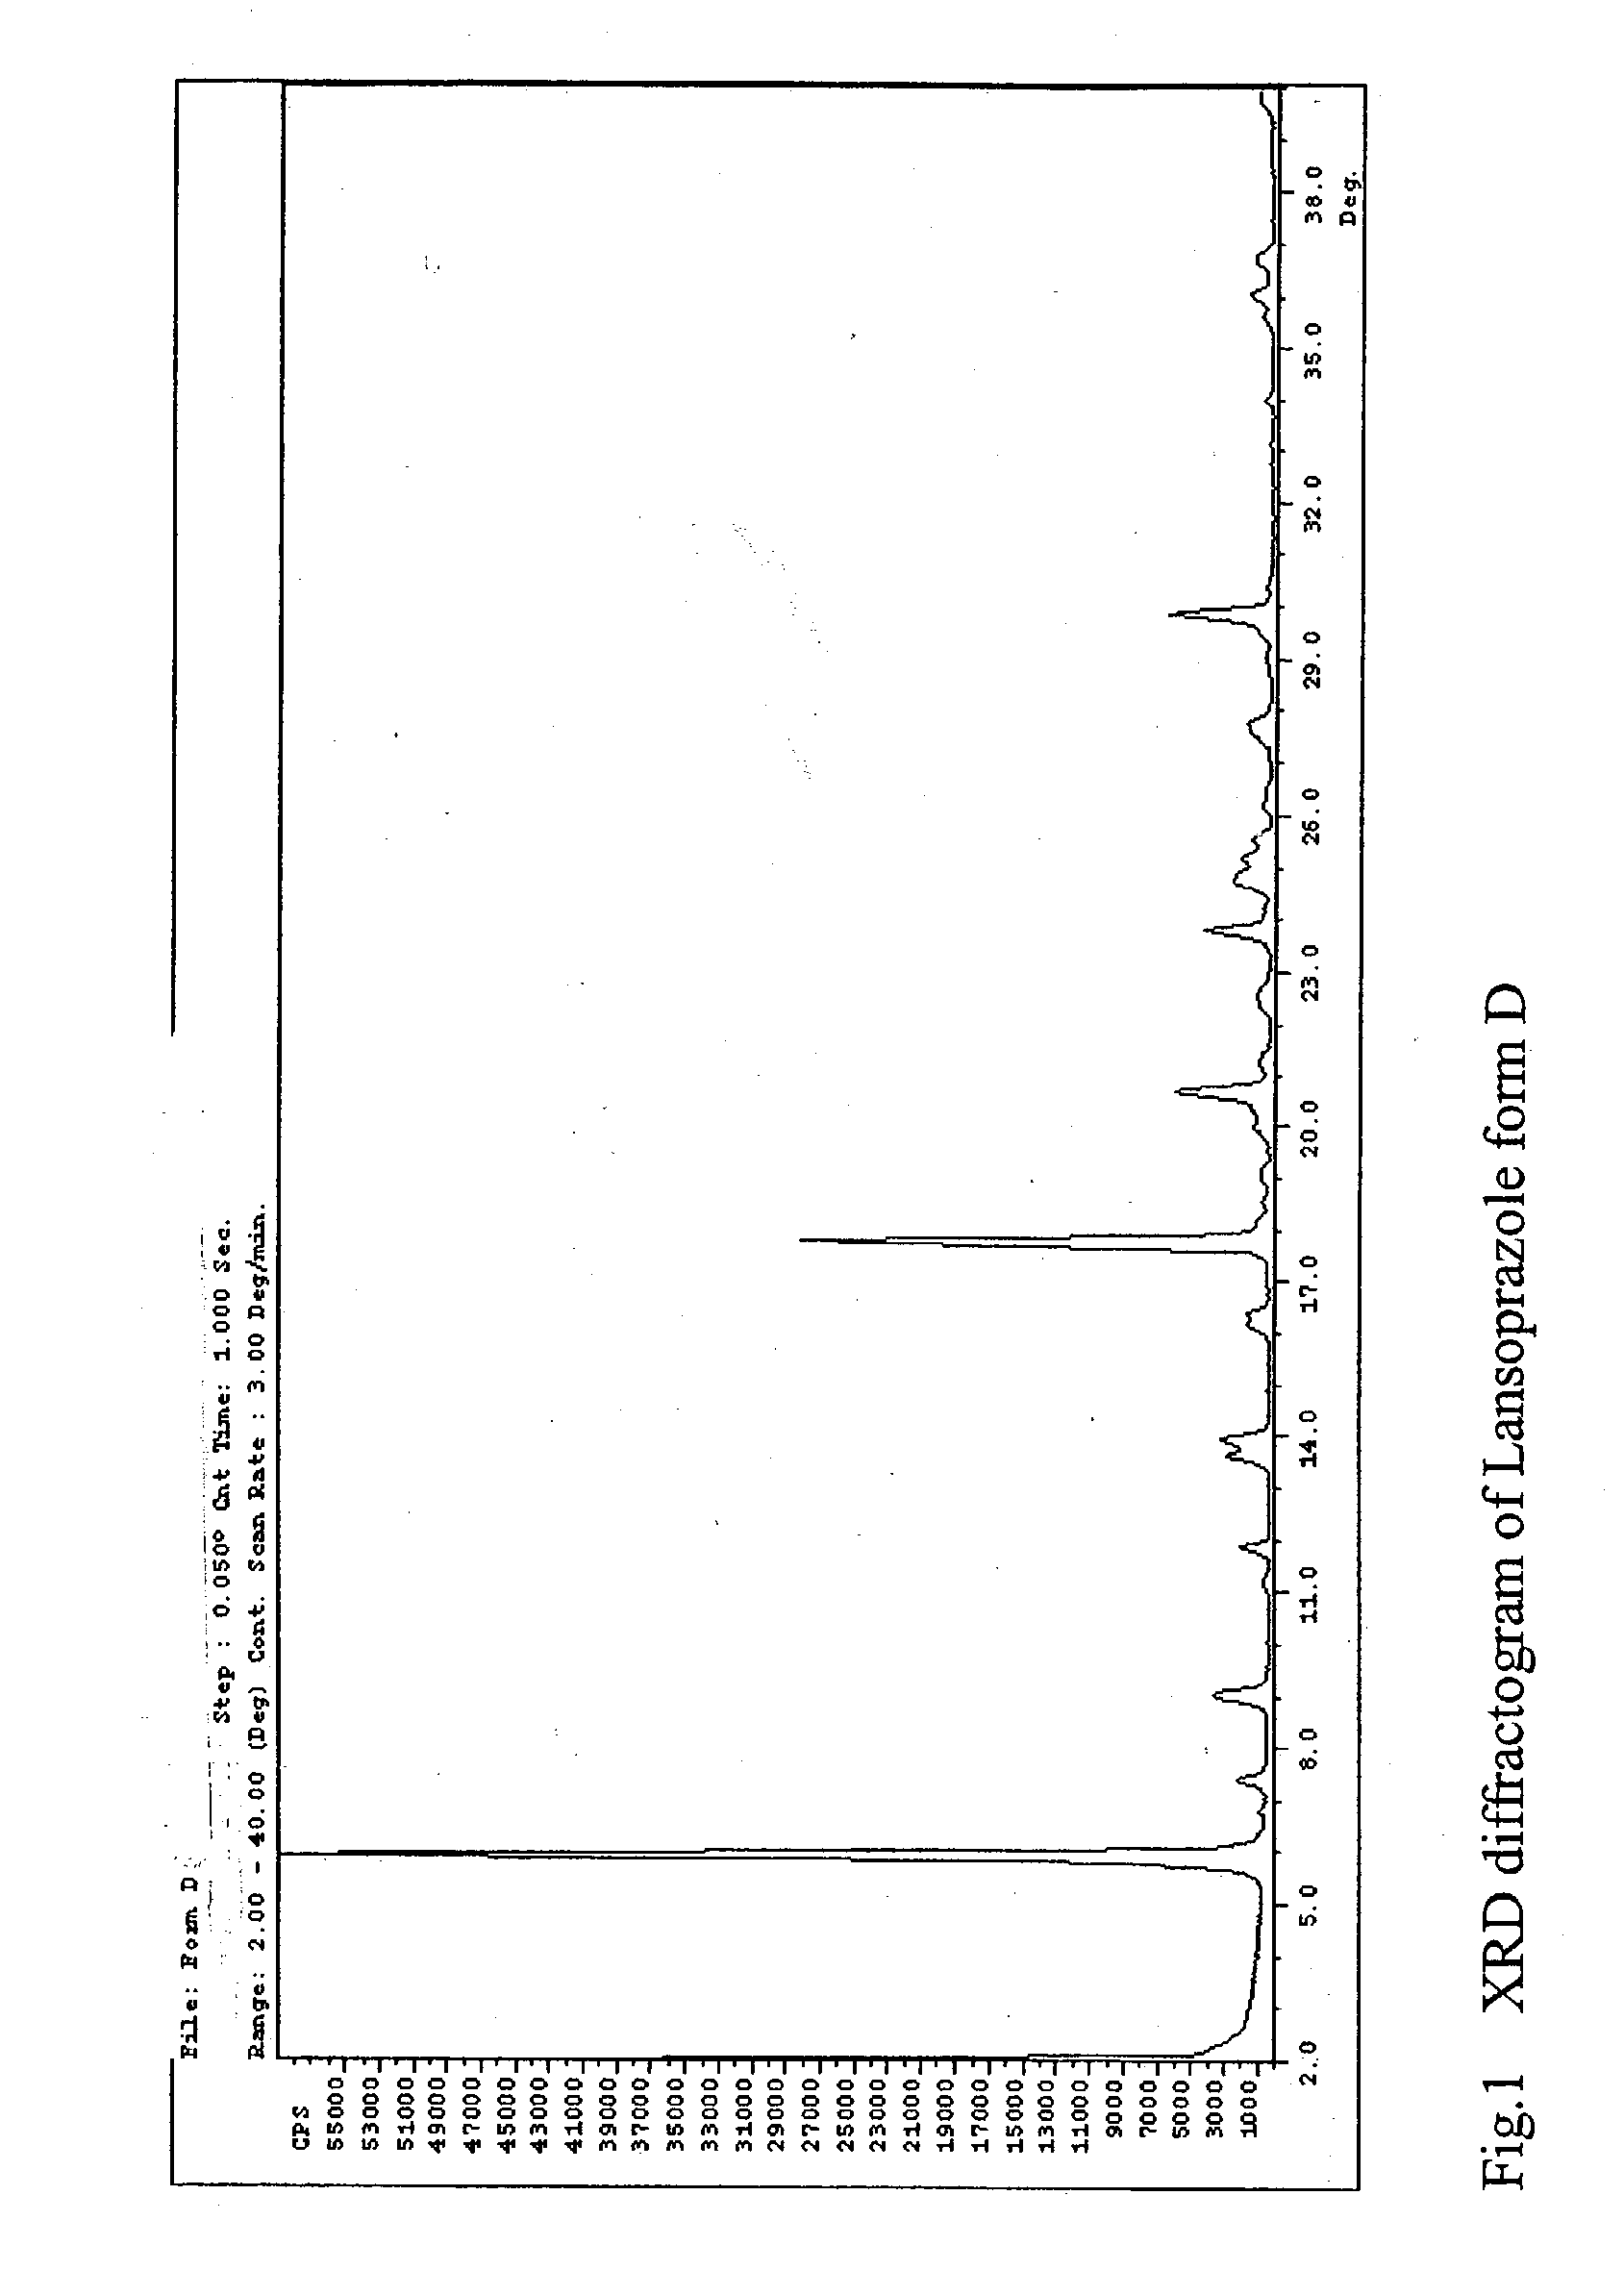 Lansoprazole polymorphs and processes for preparation thereof